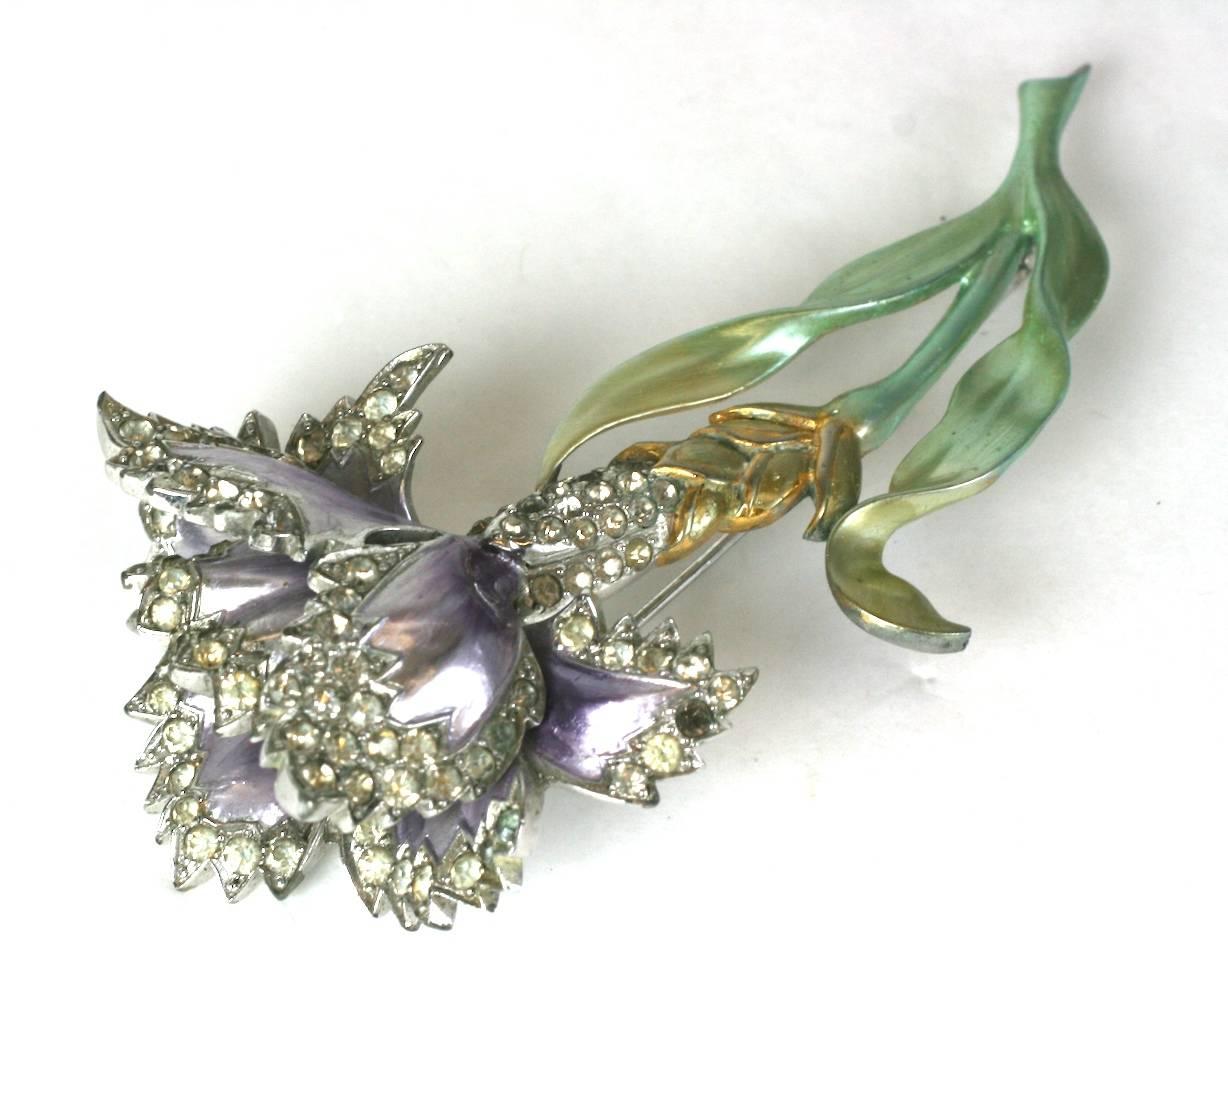 Collectible Marcel Boucher Retro Carnation brooch, of signature hand painted pearlized enamel in shades of pale greens, yellow, and lilac. The flower head of rhodium plate and crystal pave.
Excellent Condition, Striking scale,  Unsigned.
L 3.75